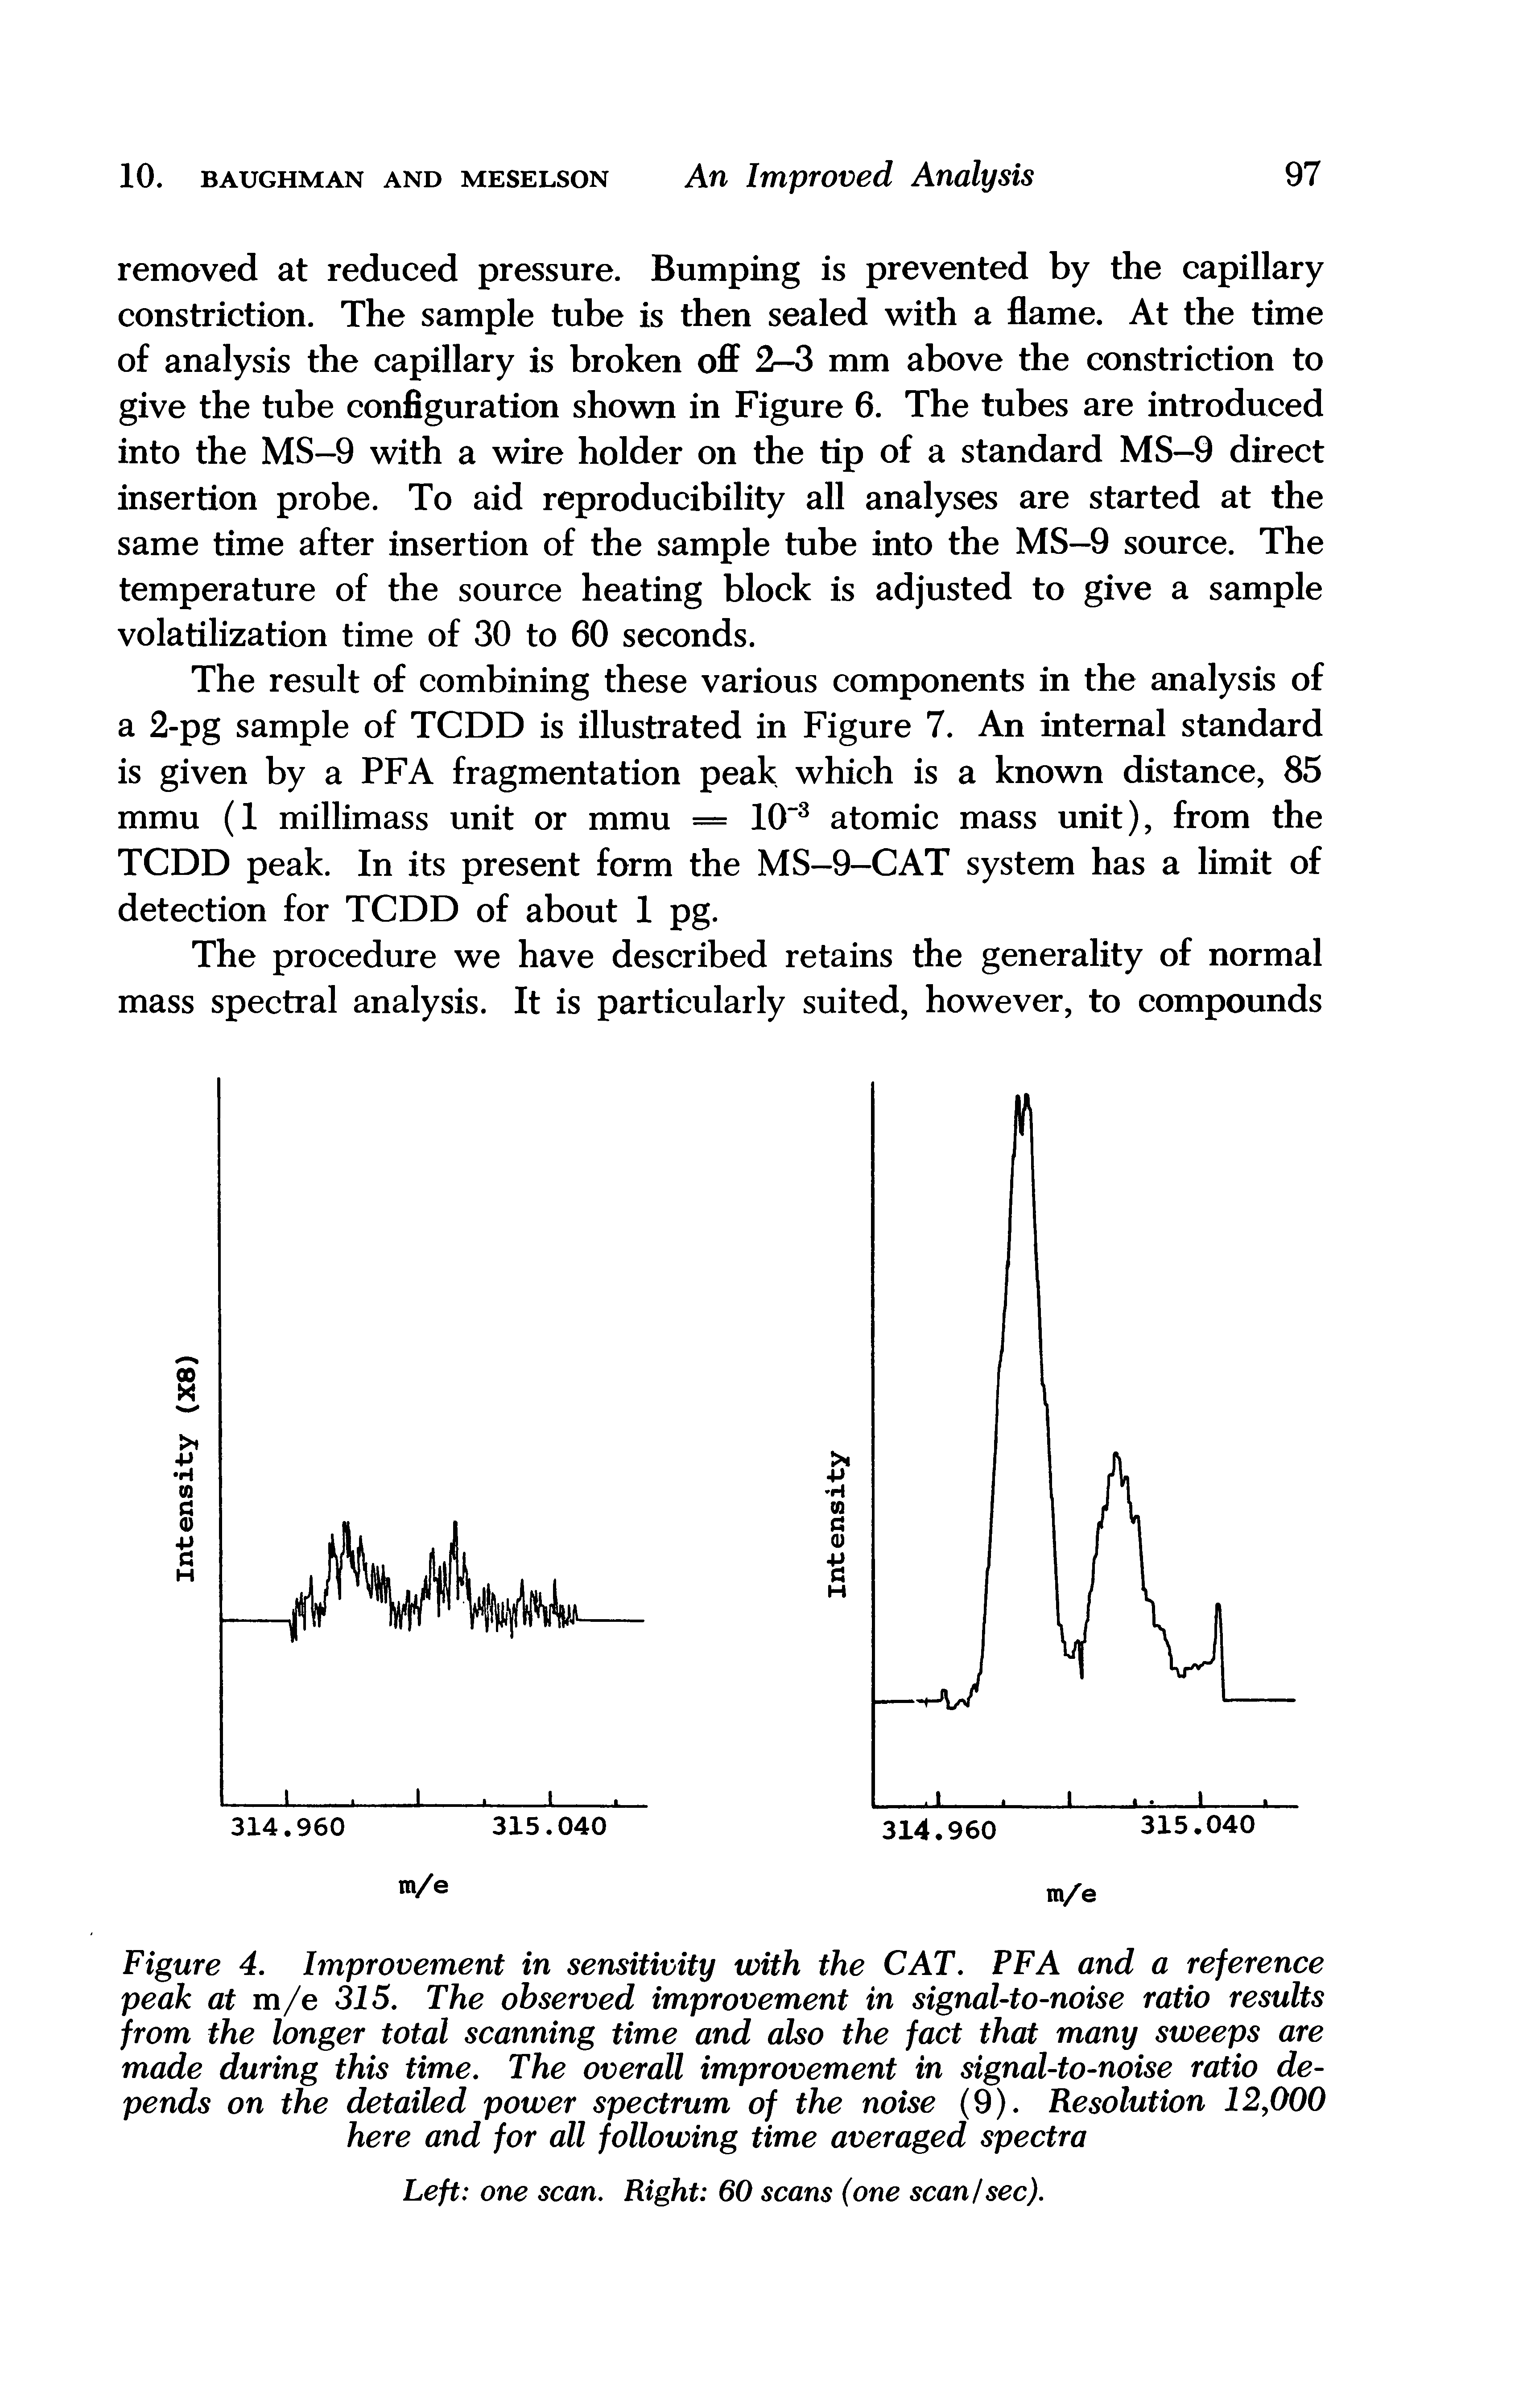 Figure 4. Improvement in sensitivity with the CAT. PFA and a reference peak at m/e 315. The observed improvement in signal-to-noise ratio results from the longer total scanning time and also the fact that many sweeps are made during this time. The overall improvement in signal-to-noise ratio depends on the detailed power spectrum of the noise (9). Resolution 12,000 here and for all following time averaged spectra...